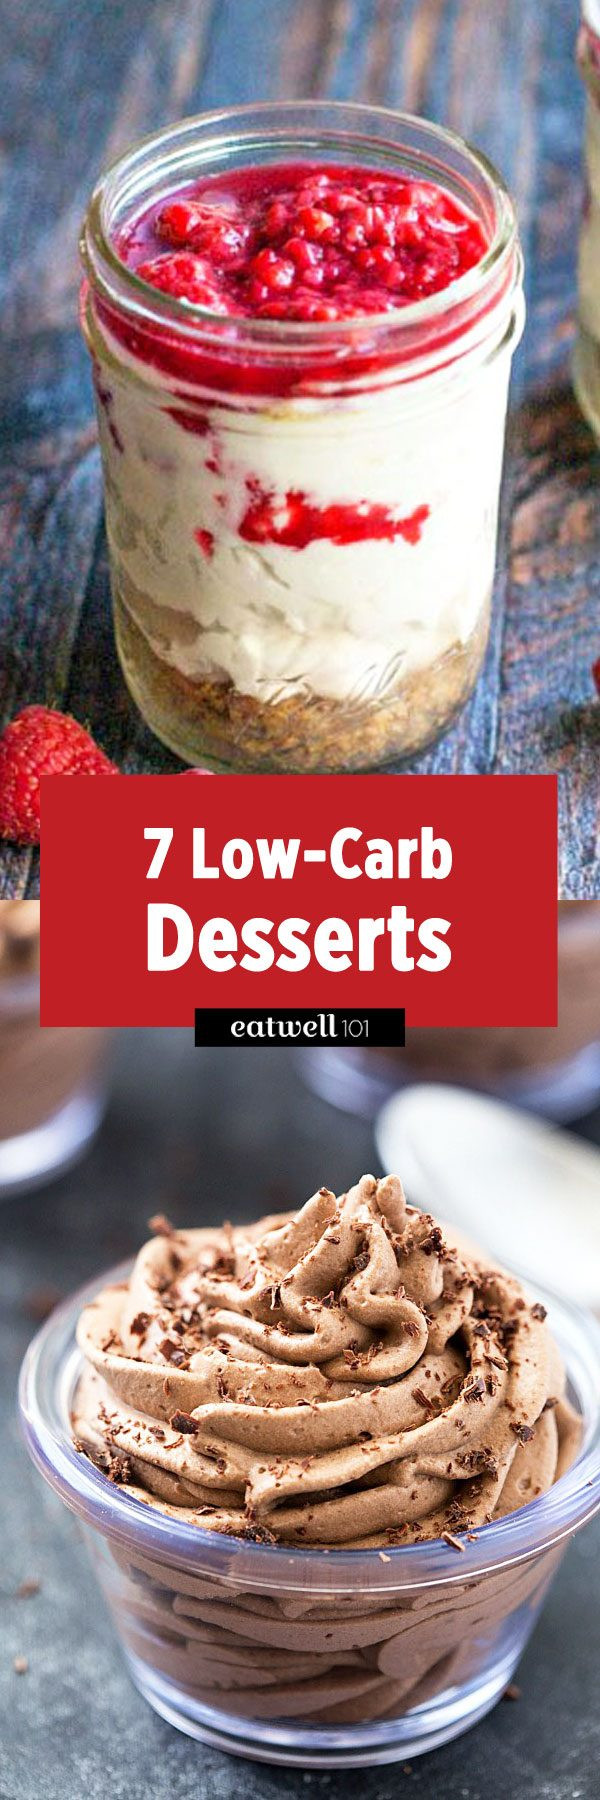 Quick Low Carb Desserts
 Your Christmas Dessert Needs These Low Carb Treats